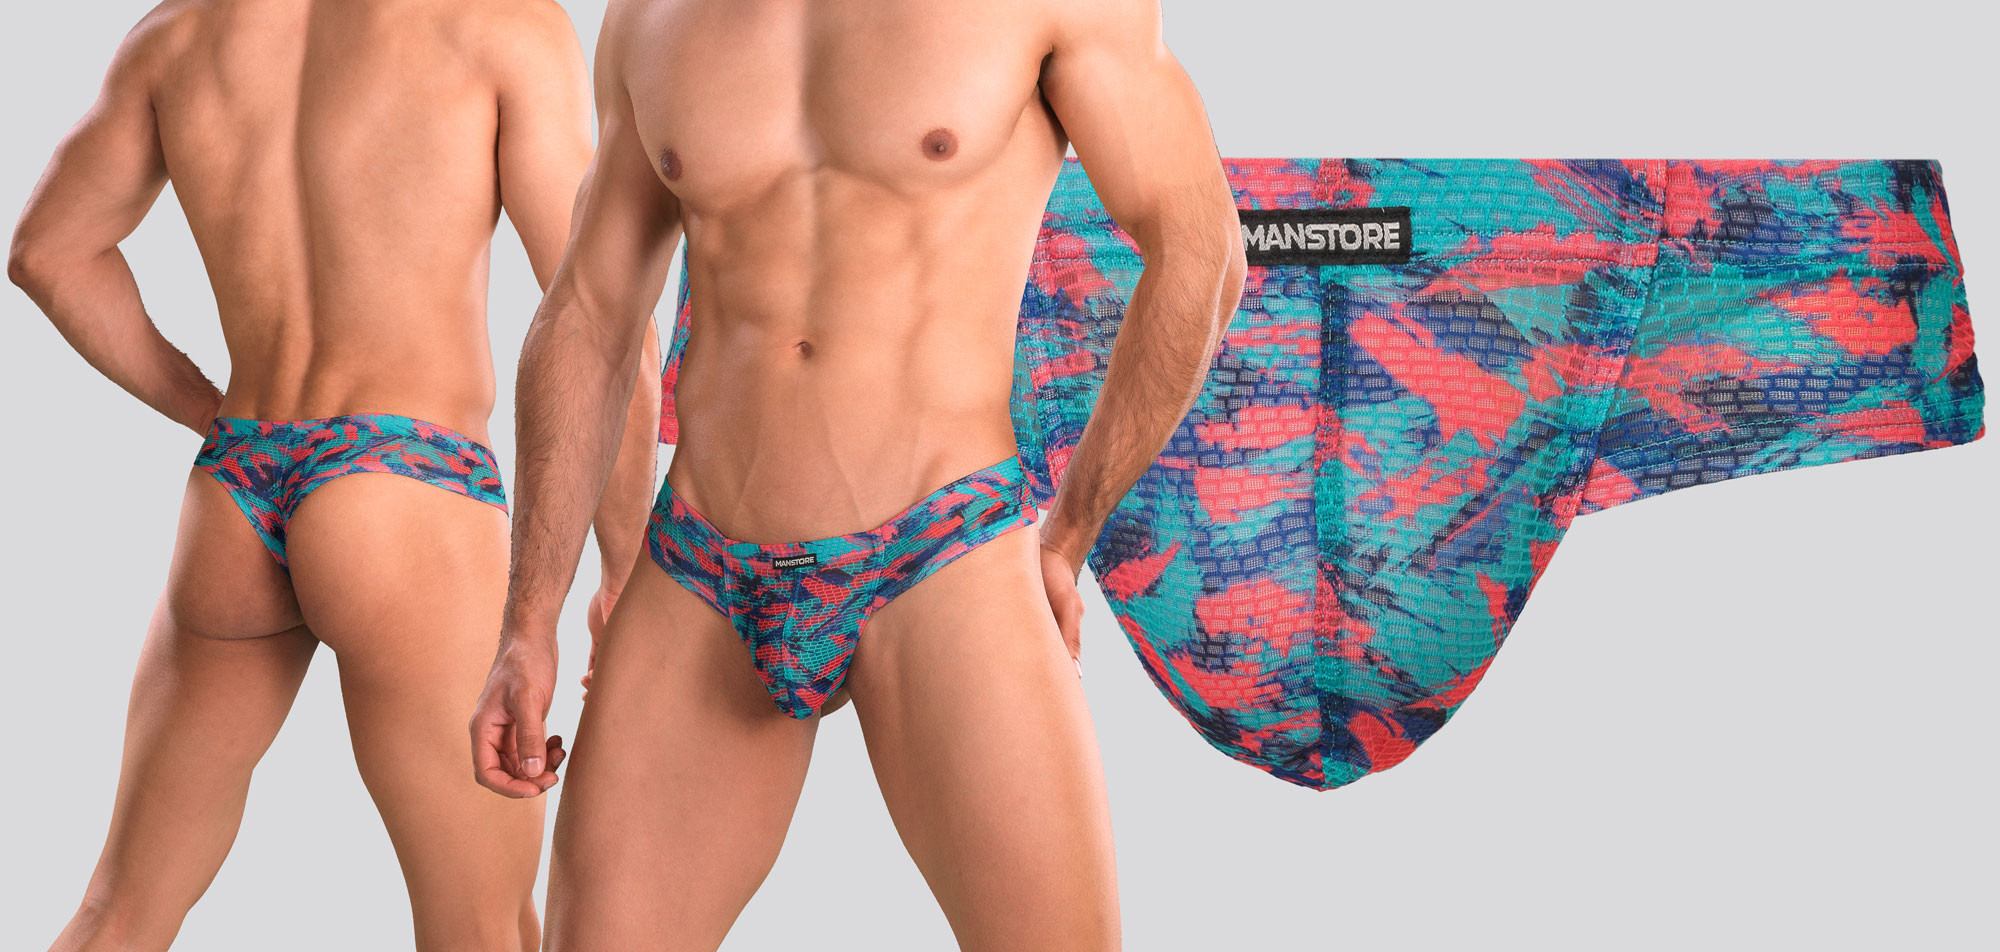 Manstore M2177 Cheeky Brief, color Nee